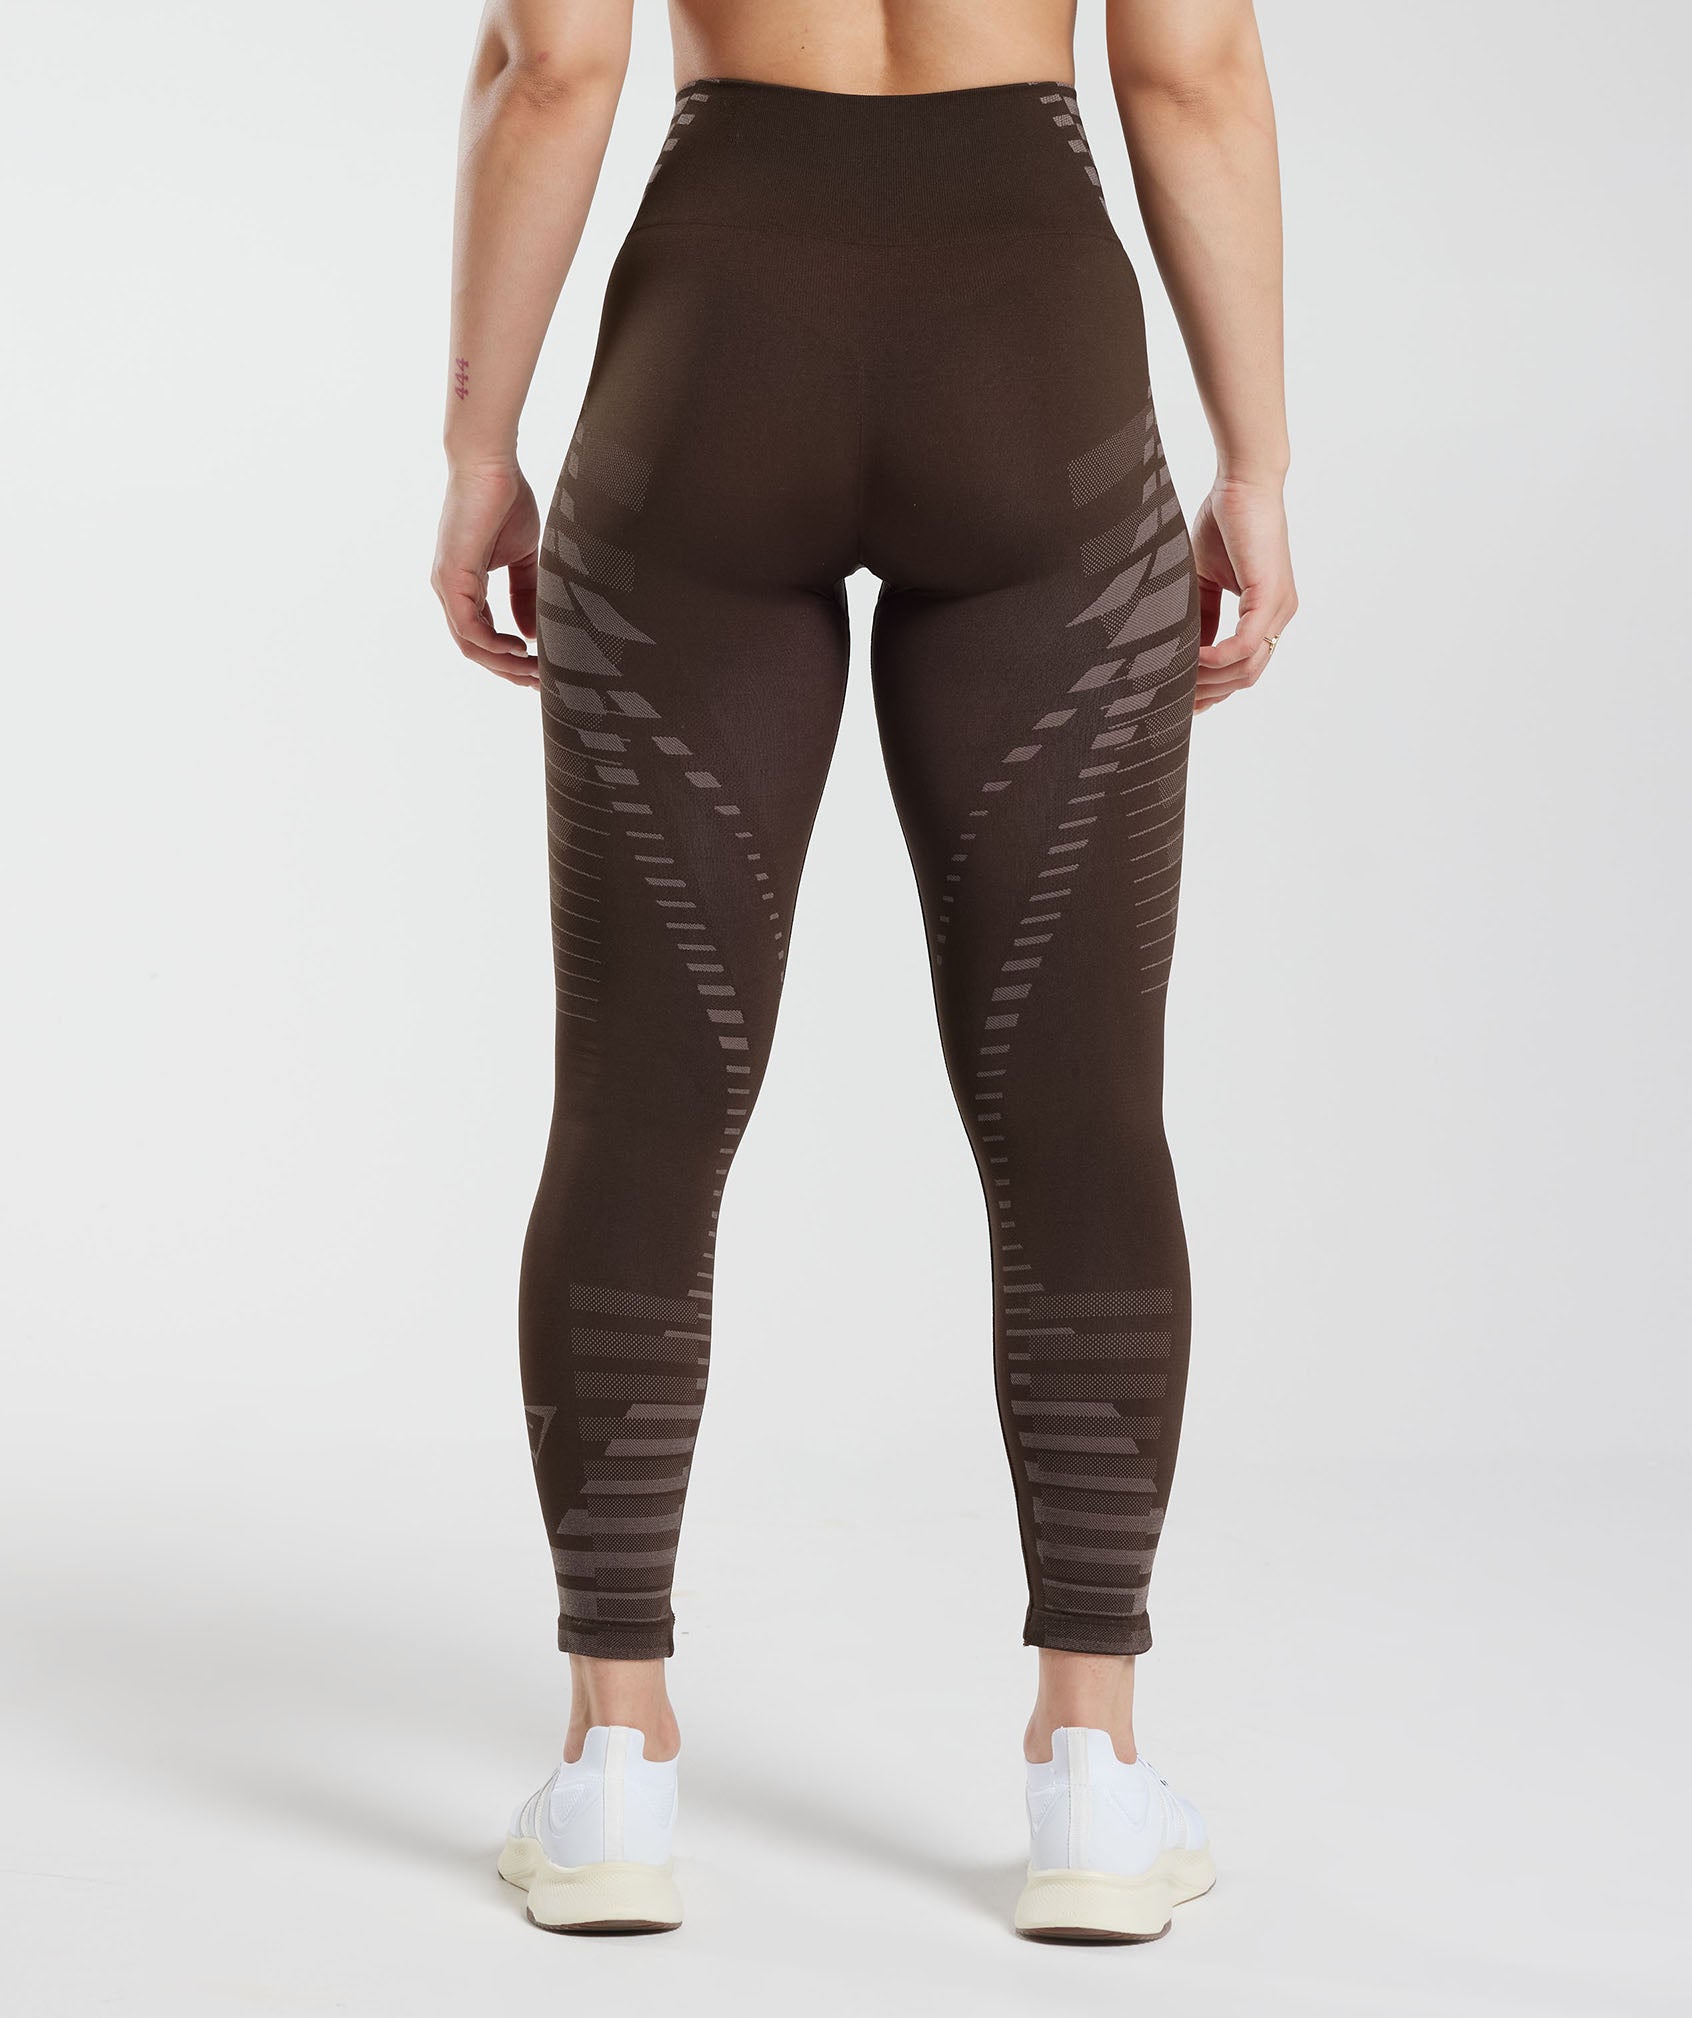 Apex Limit Leggings in Archive Brown/Truffle Brown - view 2